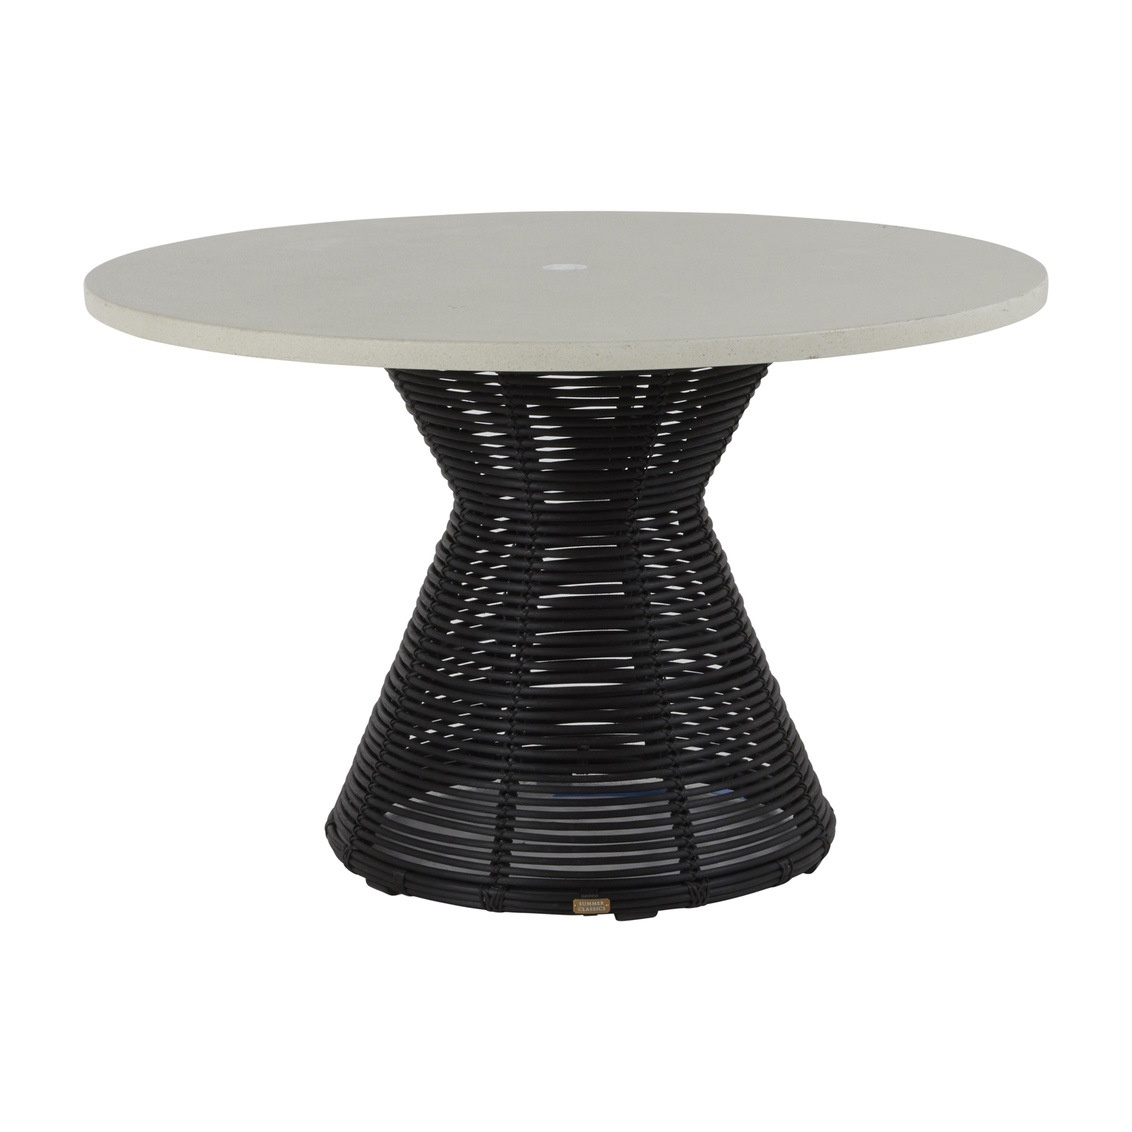 Harris Round Dining Table In Travertine, Round Dining Table With Umbrella Hole